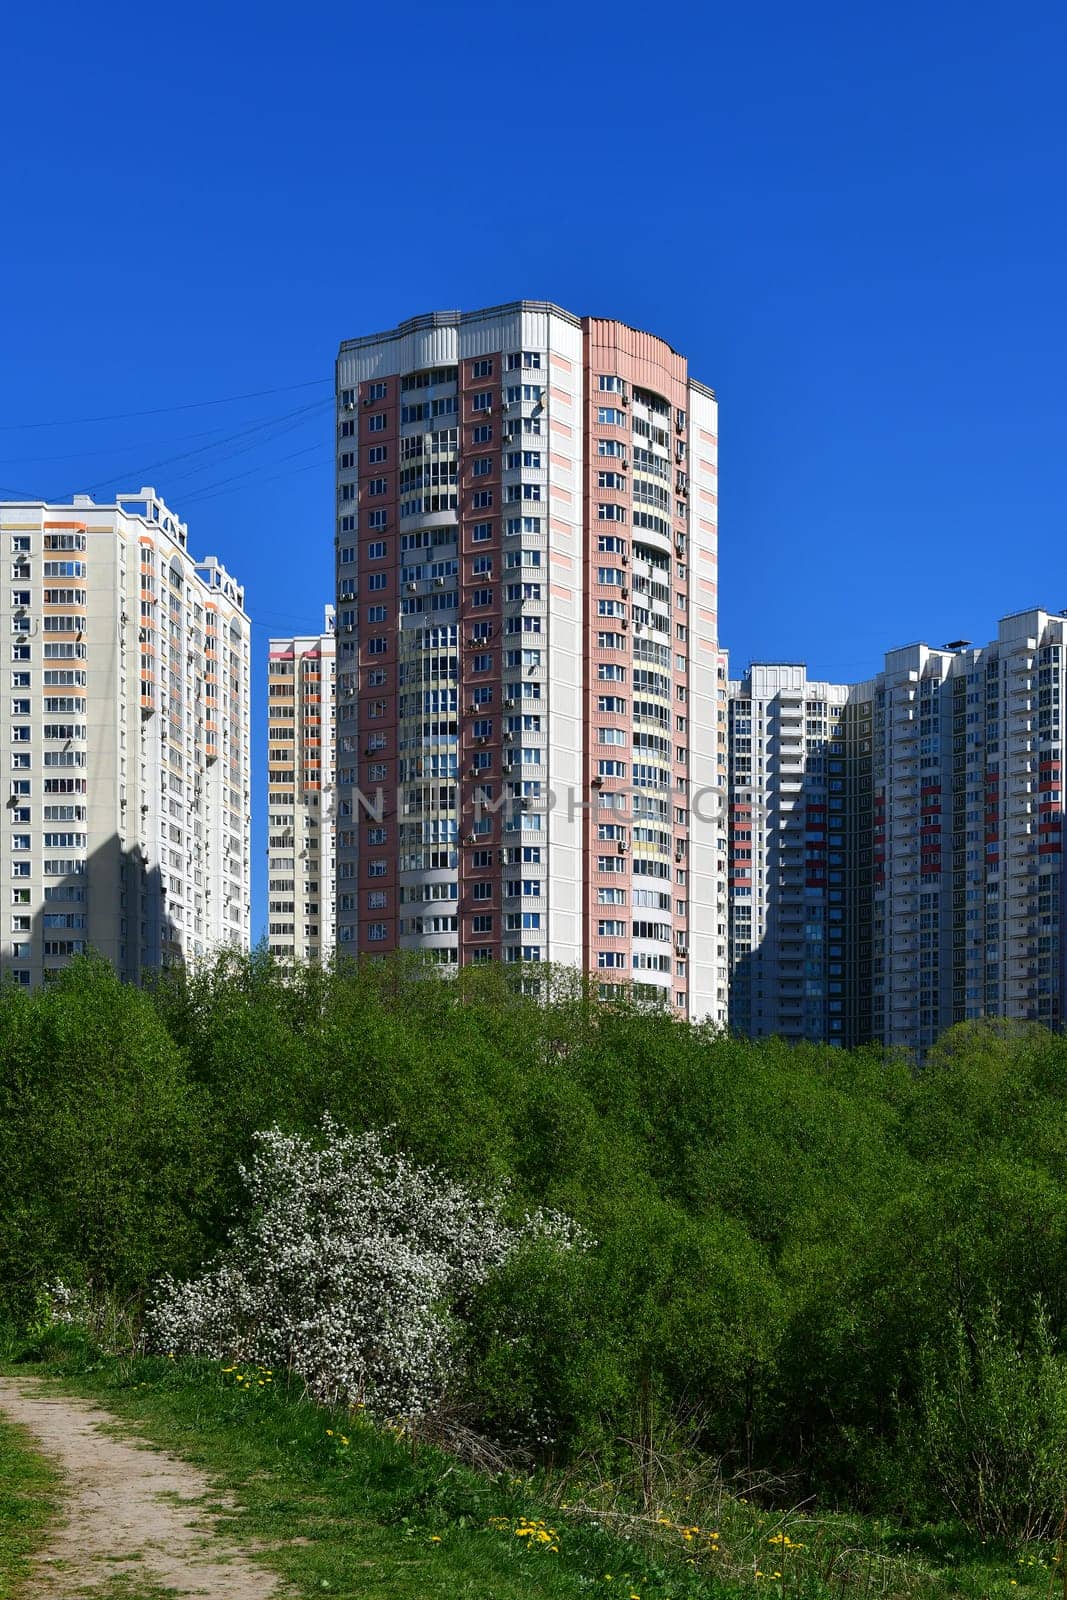 City houses surrounded by trees in the Moscow, Russia